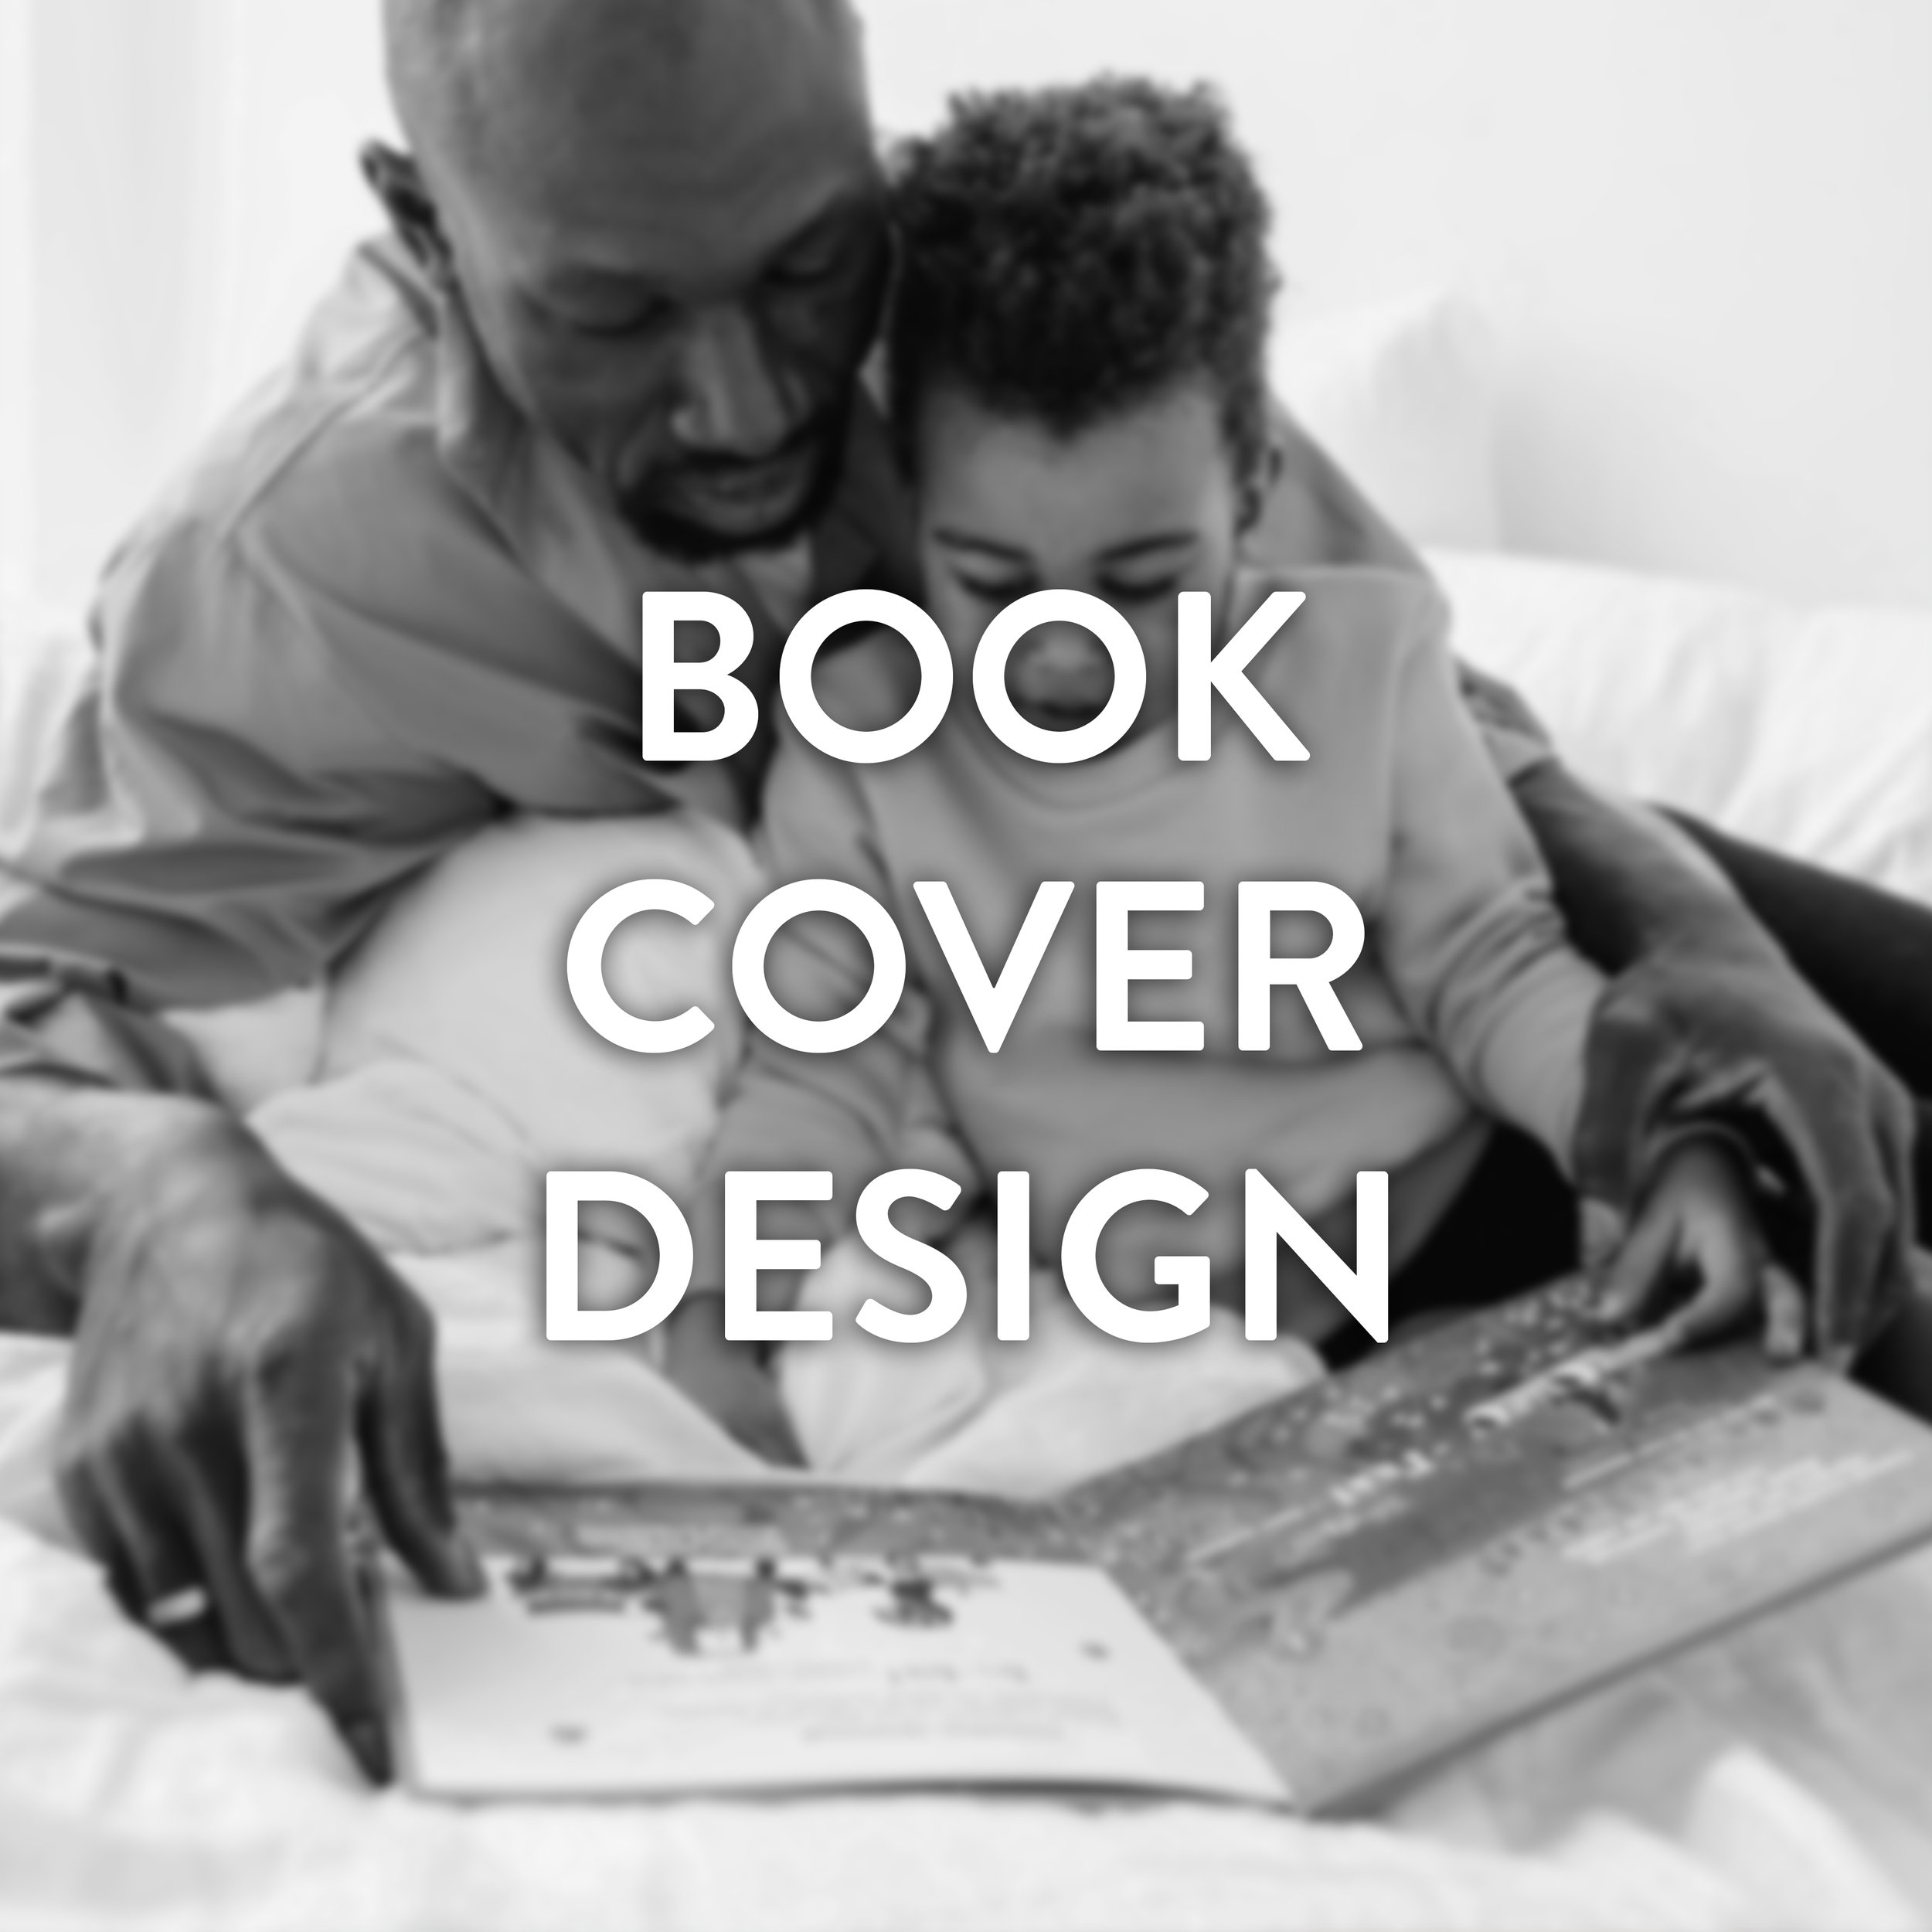 Jump to Book Cover Design.jpg